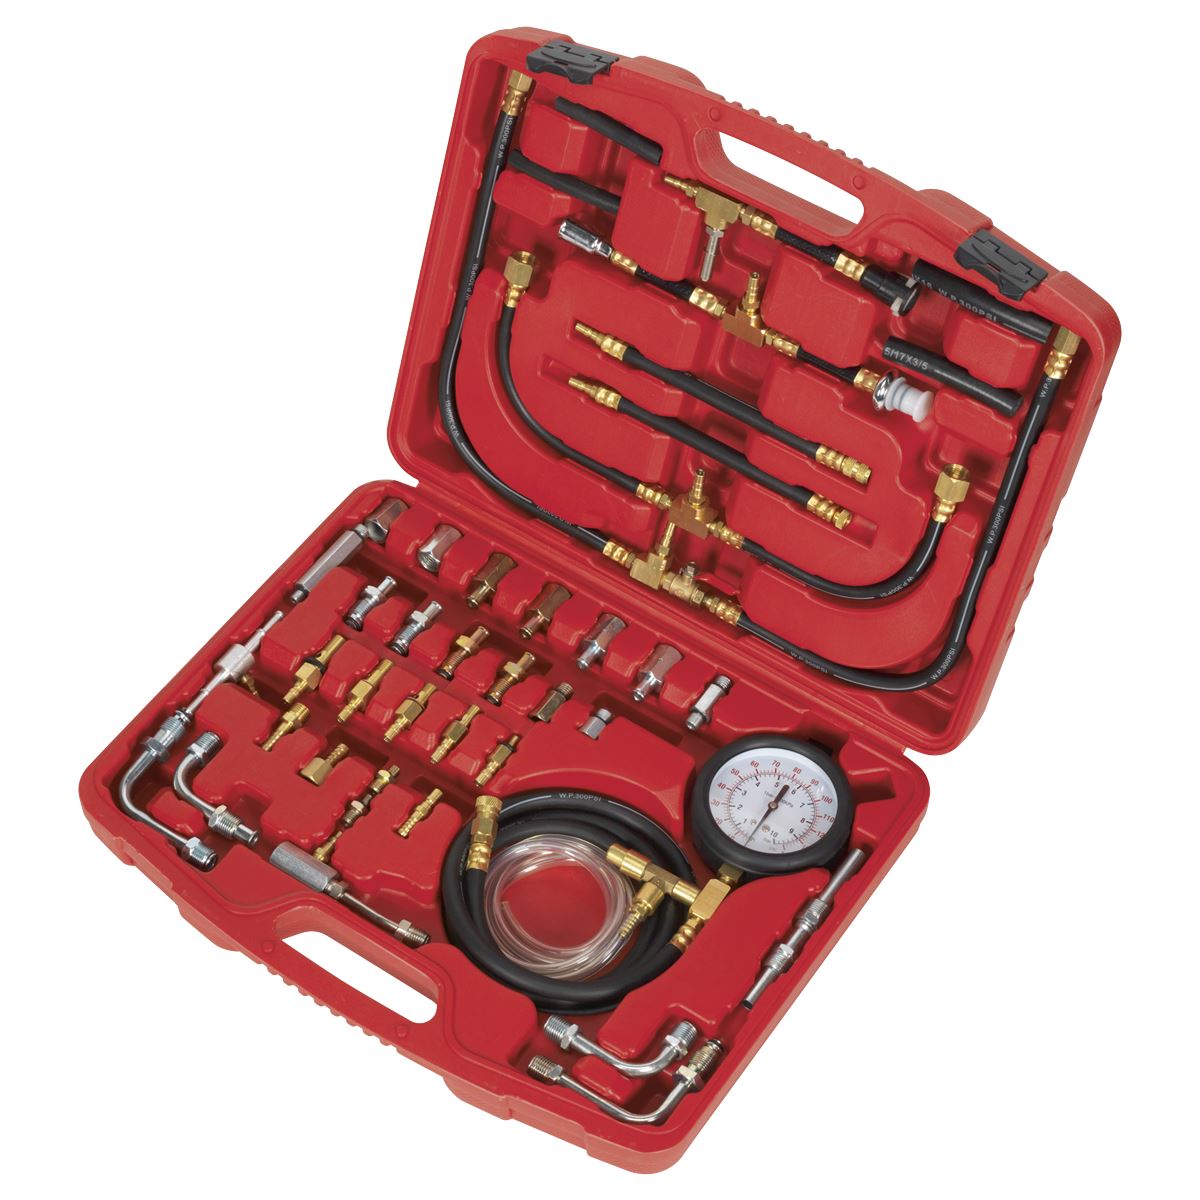 Sealey Pressure Test Kit Fuel Injection